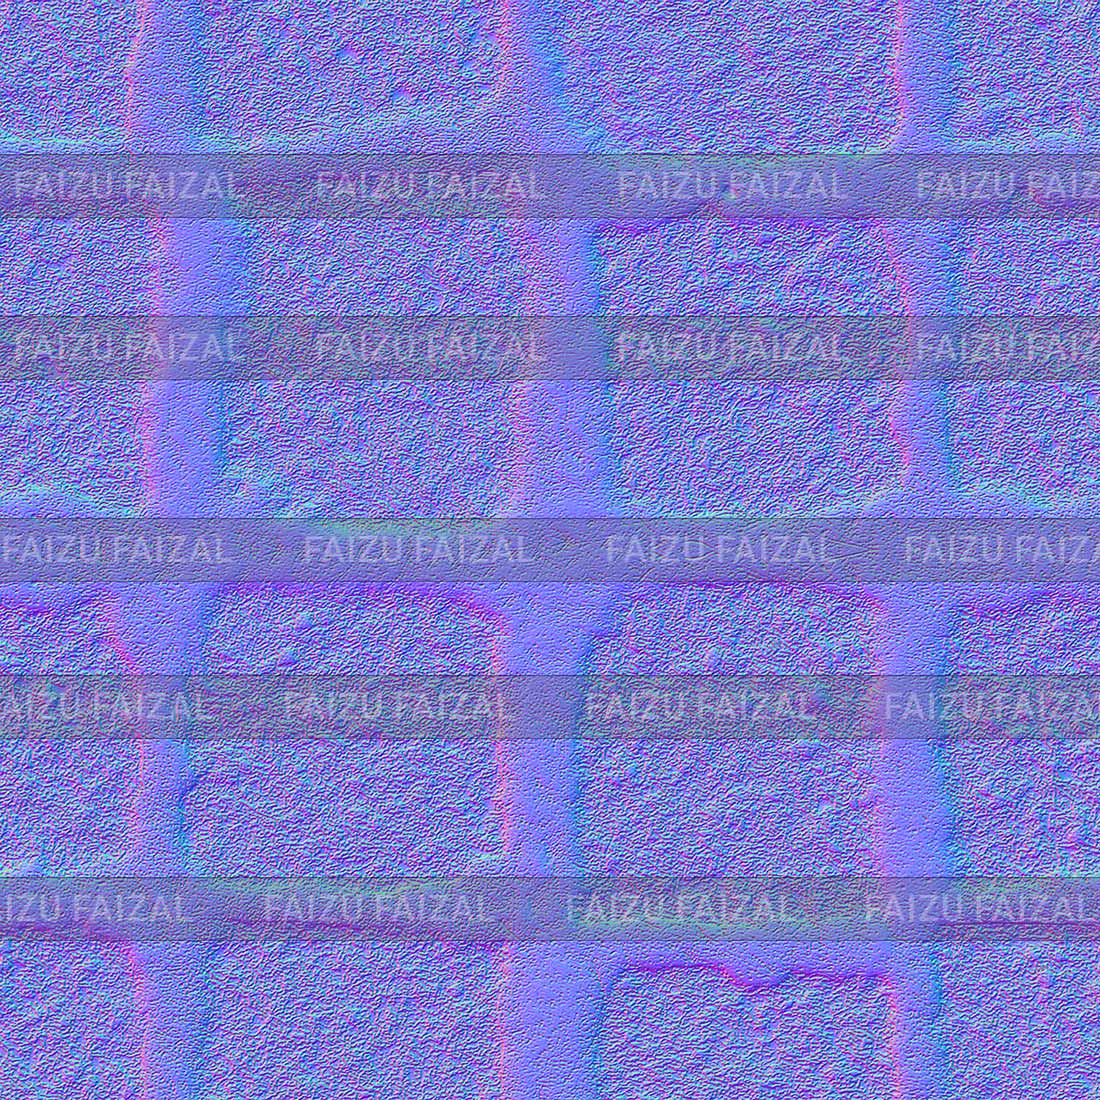 Blue and purple background with a pattern.